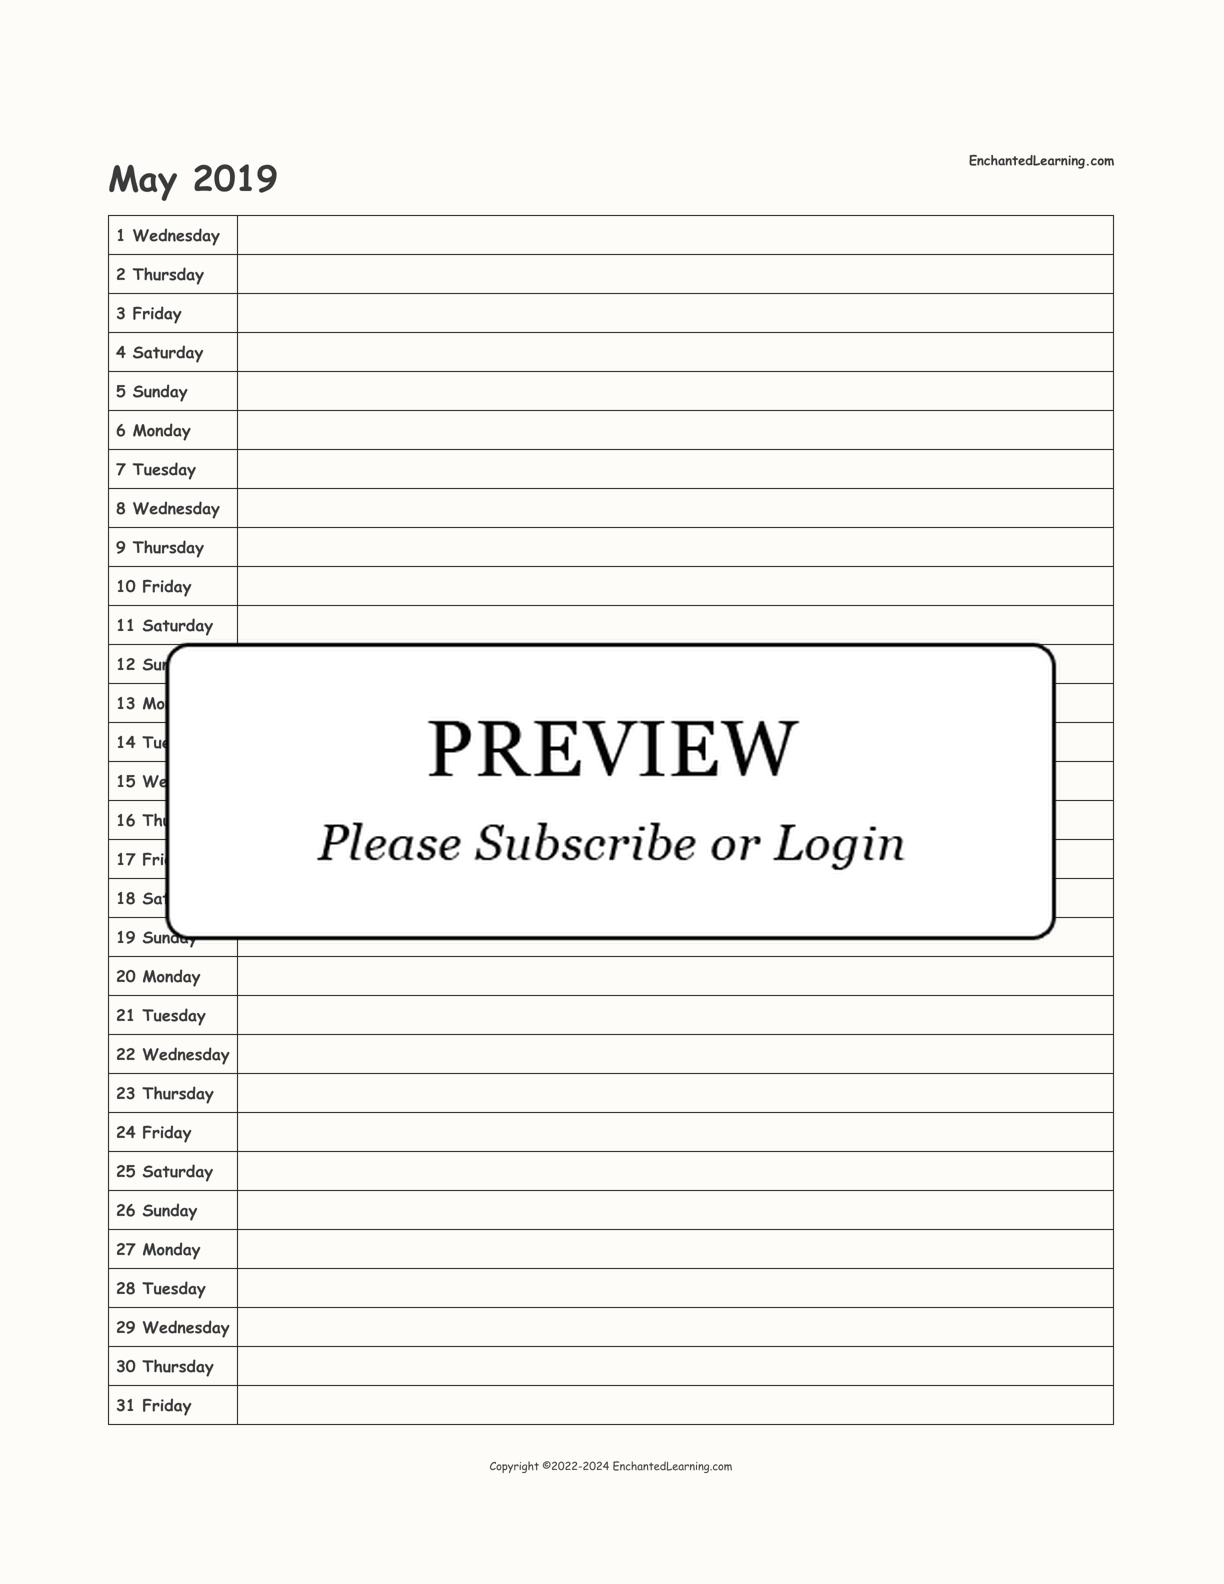 2019 Scheduling Calendar interactive printout page 5